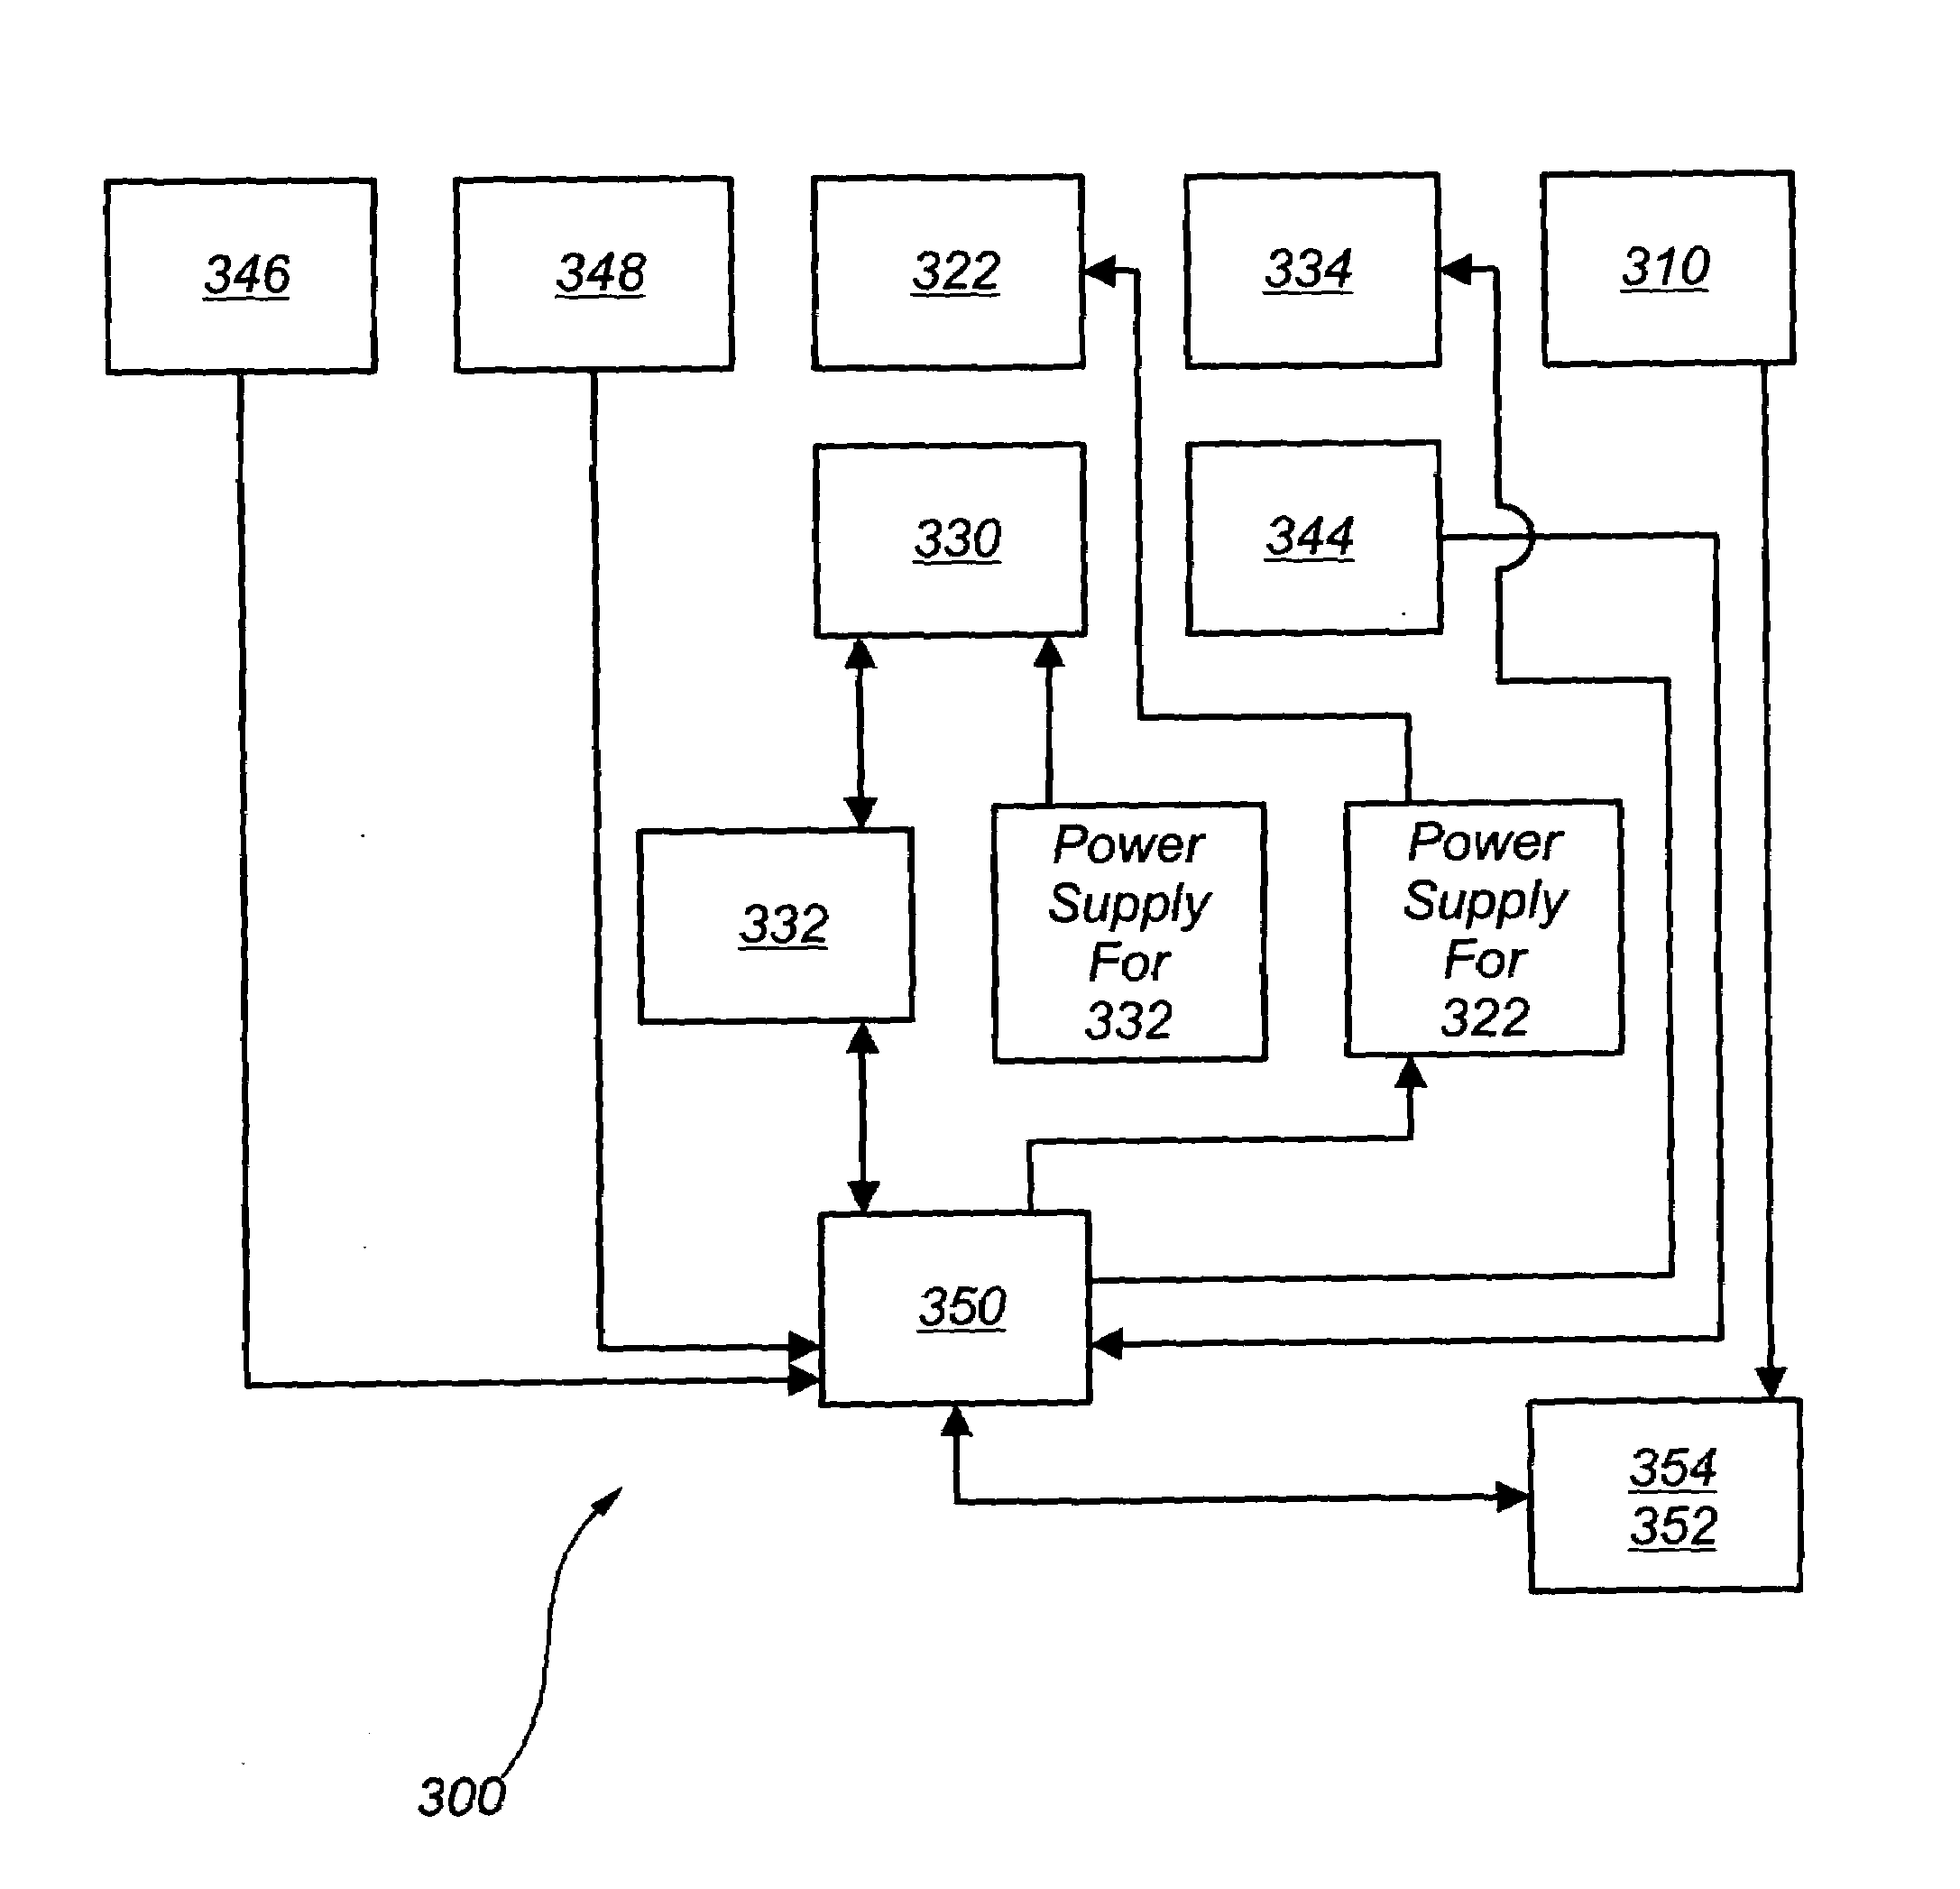 Apparatus and method for obtaining a reflectance property indication of a sample